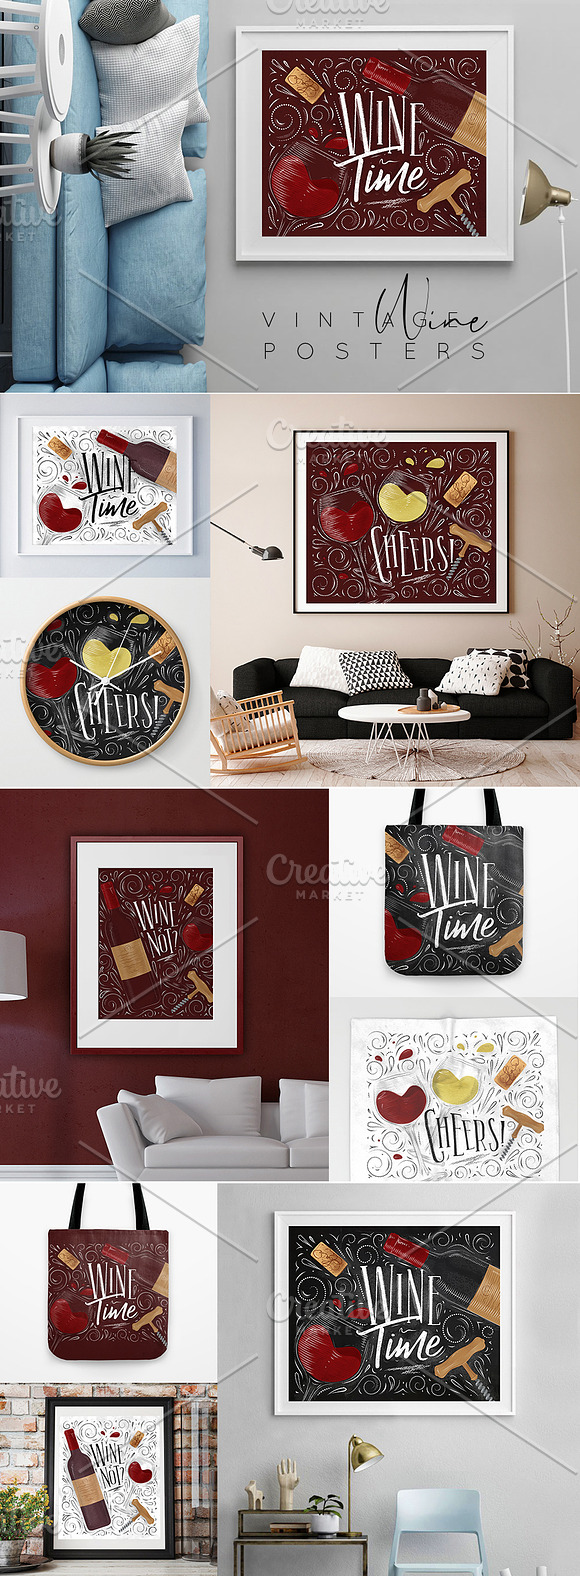 Vintage Wine Posters in Illustrations - product preview 5